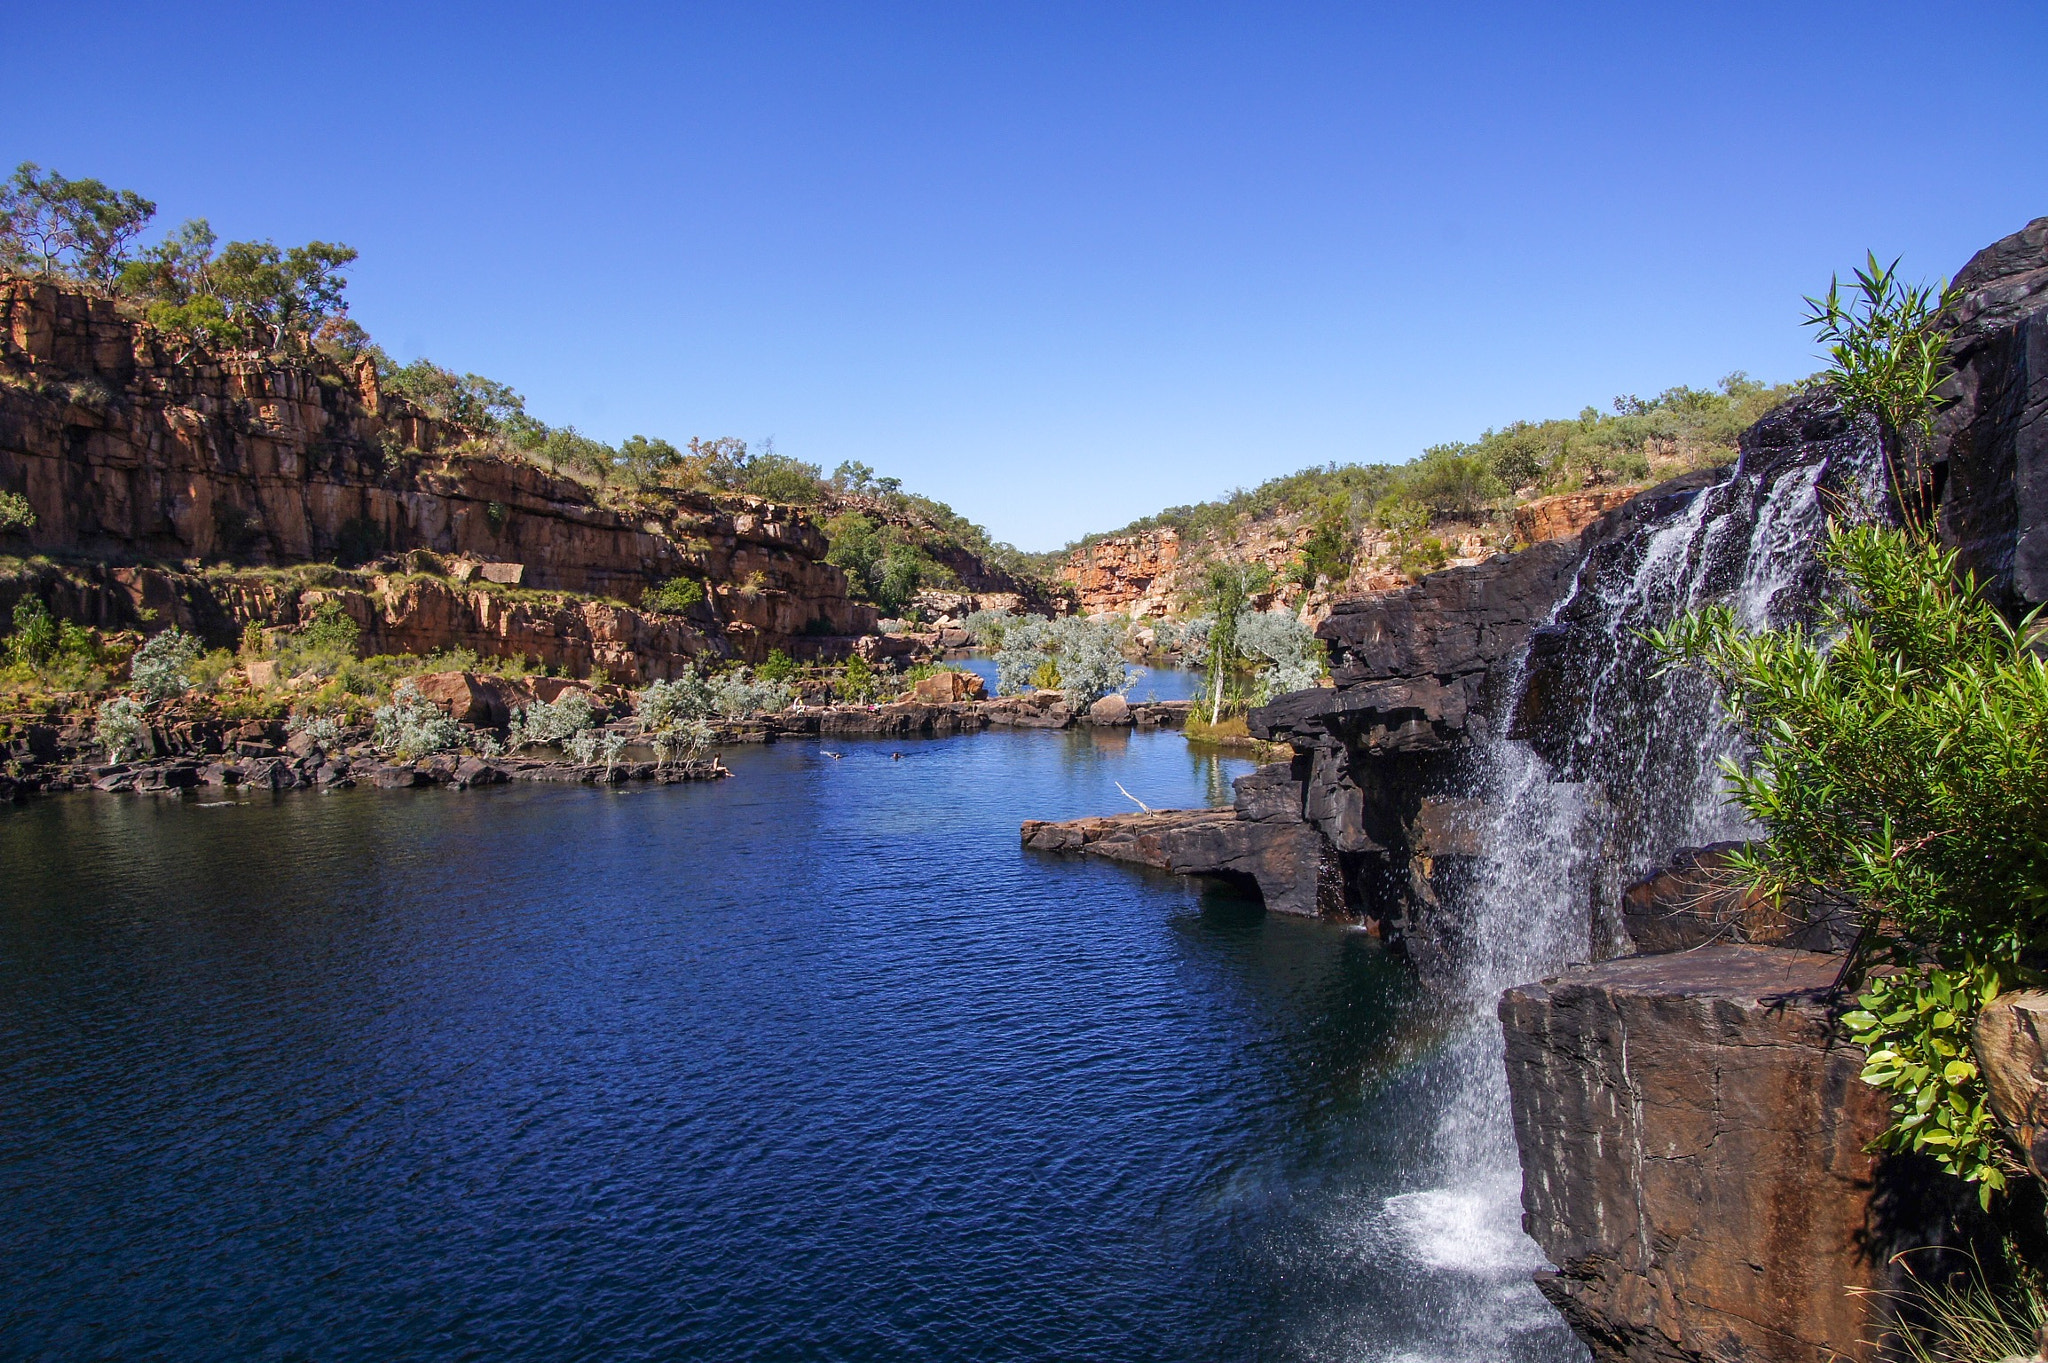 Sony SLT-A33 + Tamron 18-270mm F3.5-6.3 Di II PZD sample photo. Manning gorge, kimberley's photography